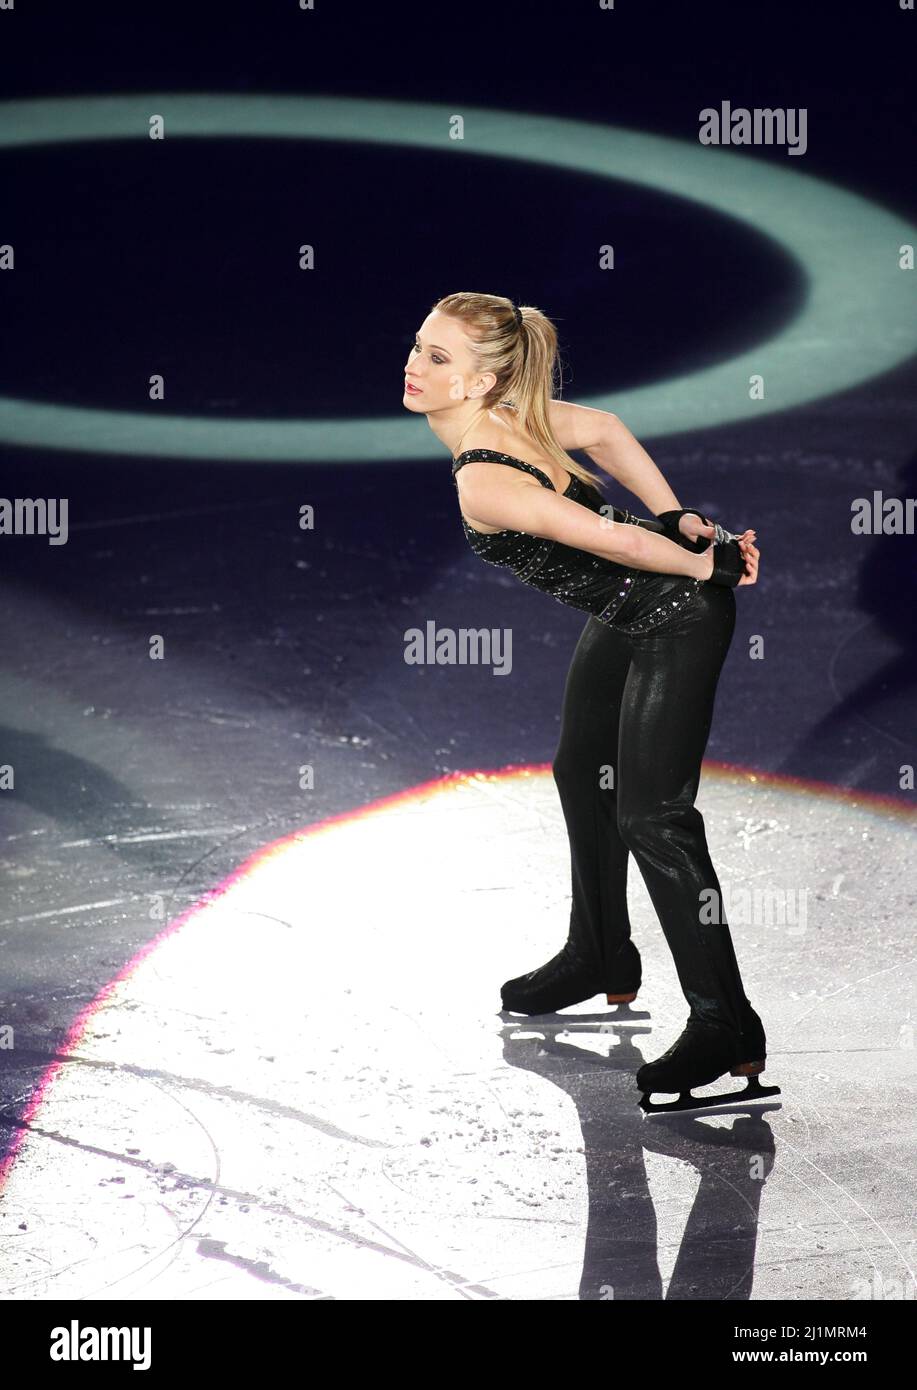 Dec 14, 2008-Goyang, South Korea-Canada's Joannie Rochette performs during the gala exhibition of the ISU Grand Prix of Figure Skating Final Exhibition 2008/2009 in Goyang near Seoul December 14, 2008. Stock Photo